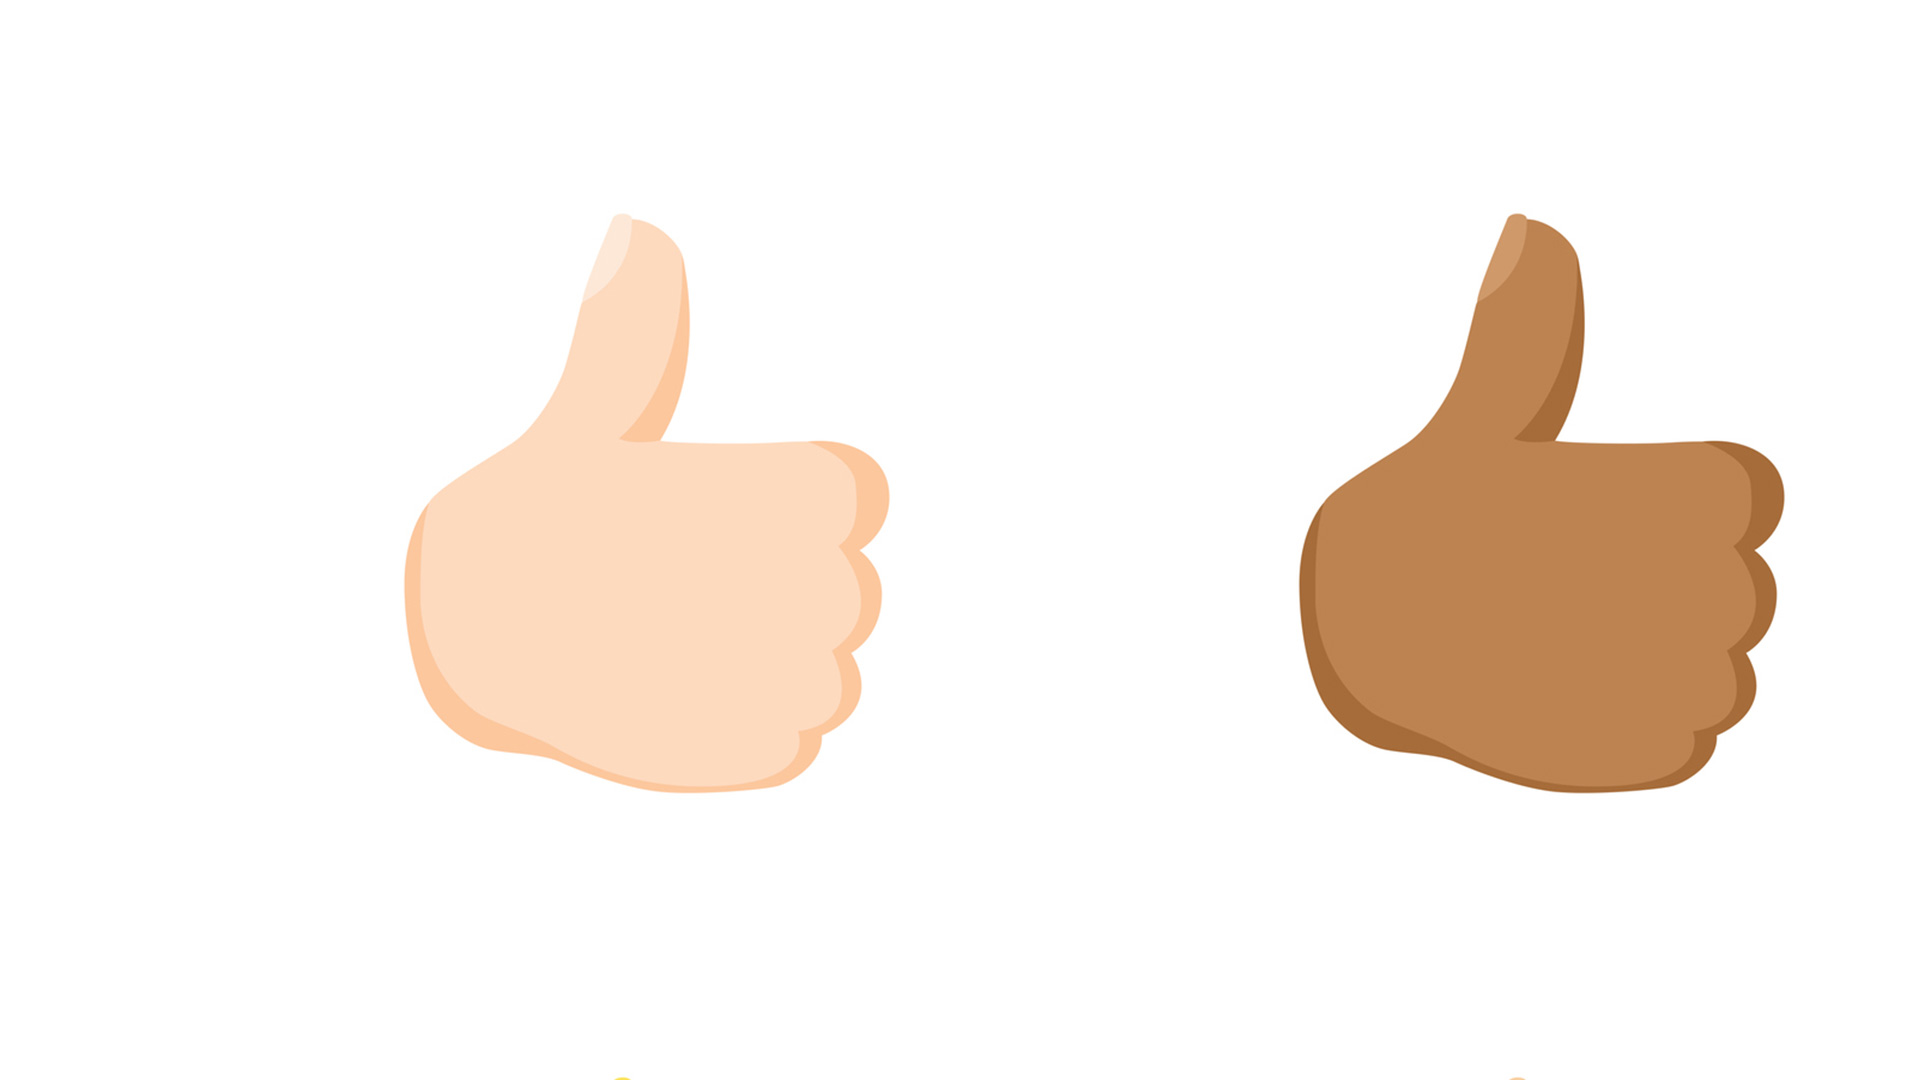 What does the thumbs-up emoji stand for?